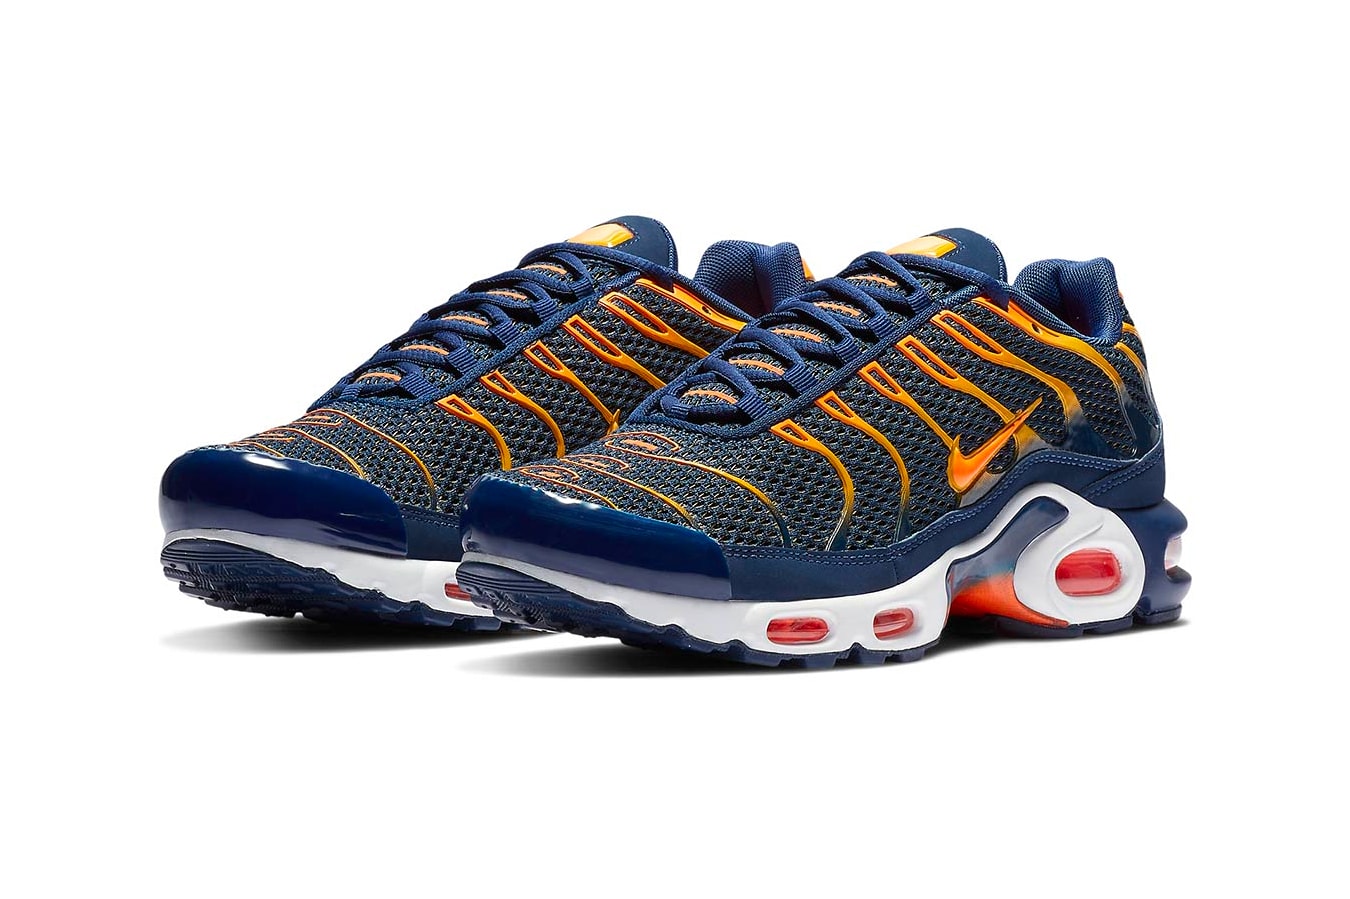 Nike Air Max Plus "Blue Void" Release Date price info Blue Void/University Gold/White/Total Orange sneaker colorway purchase stockist buy online 